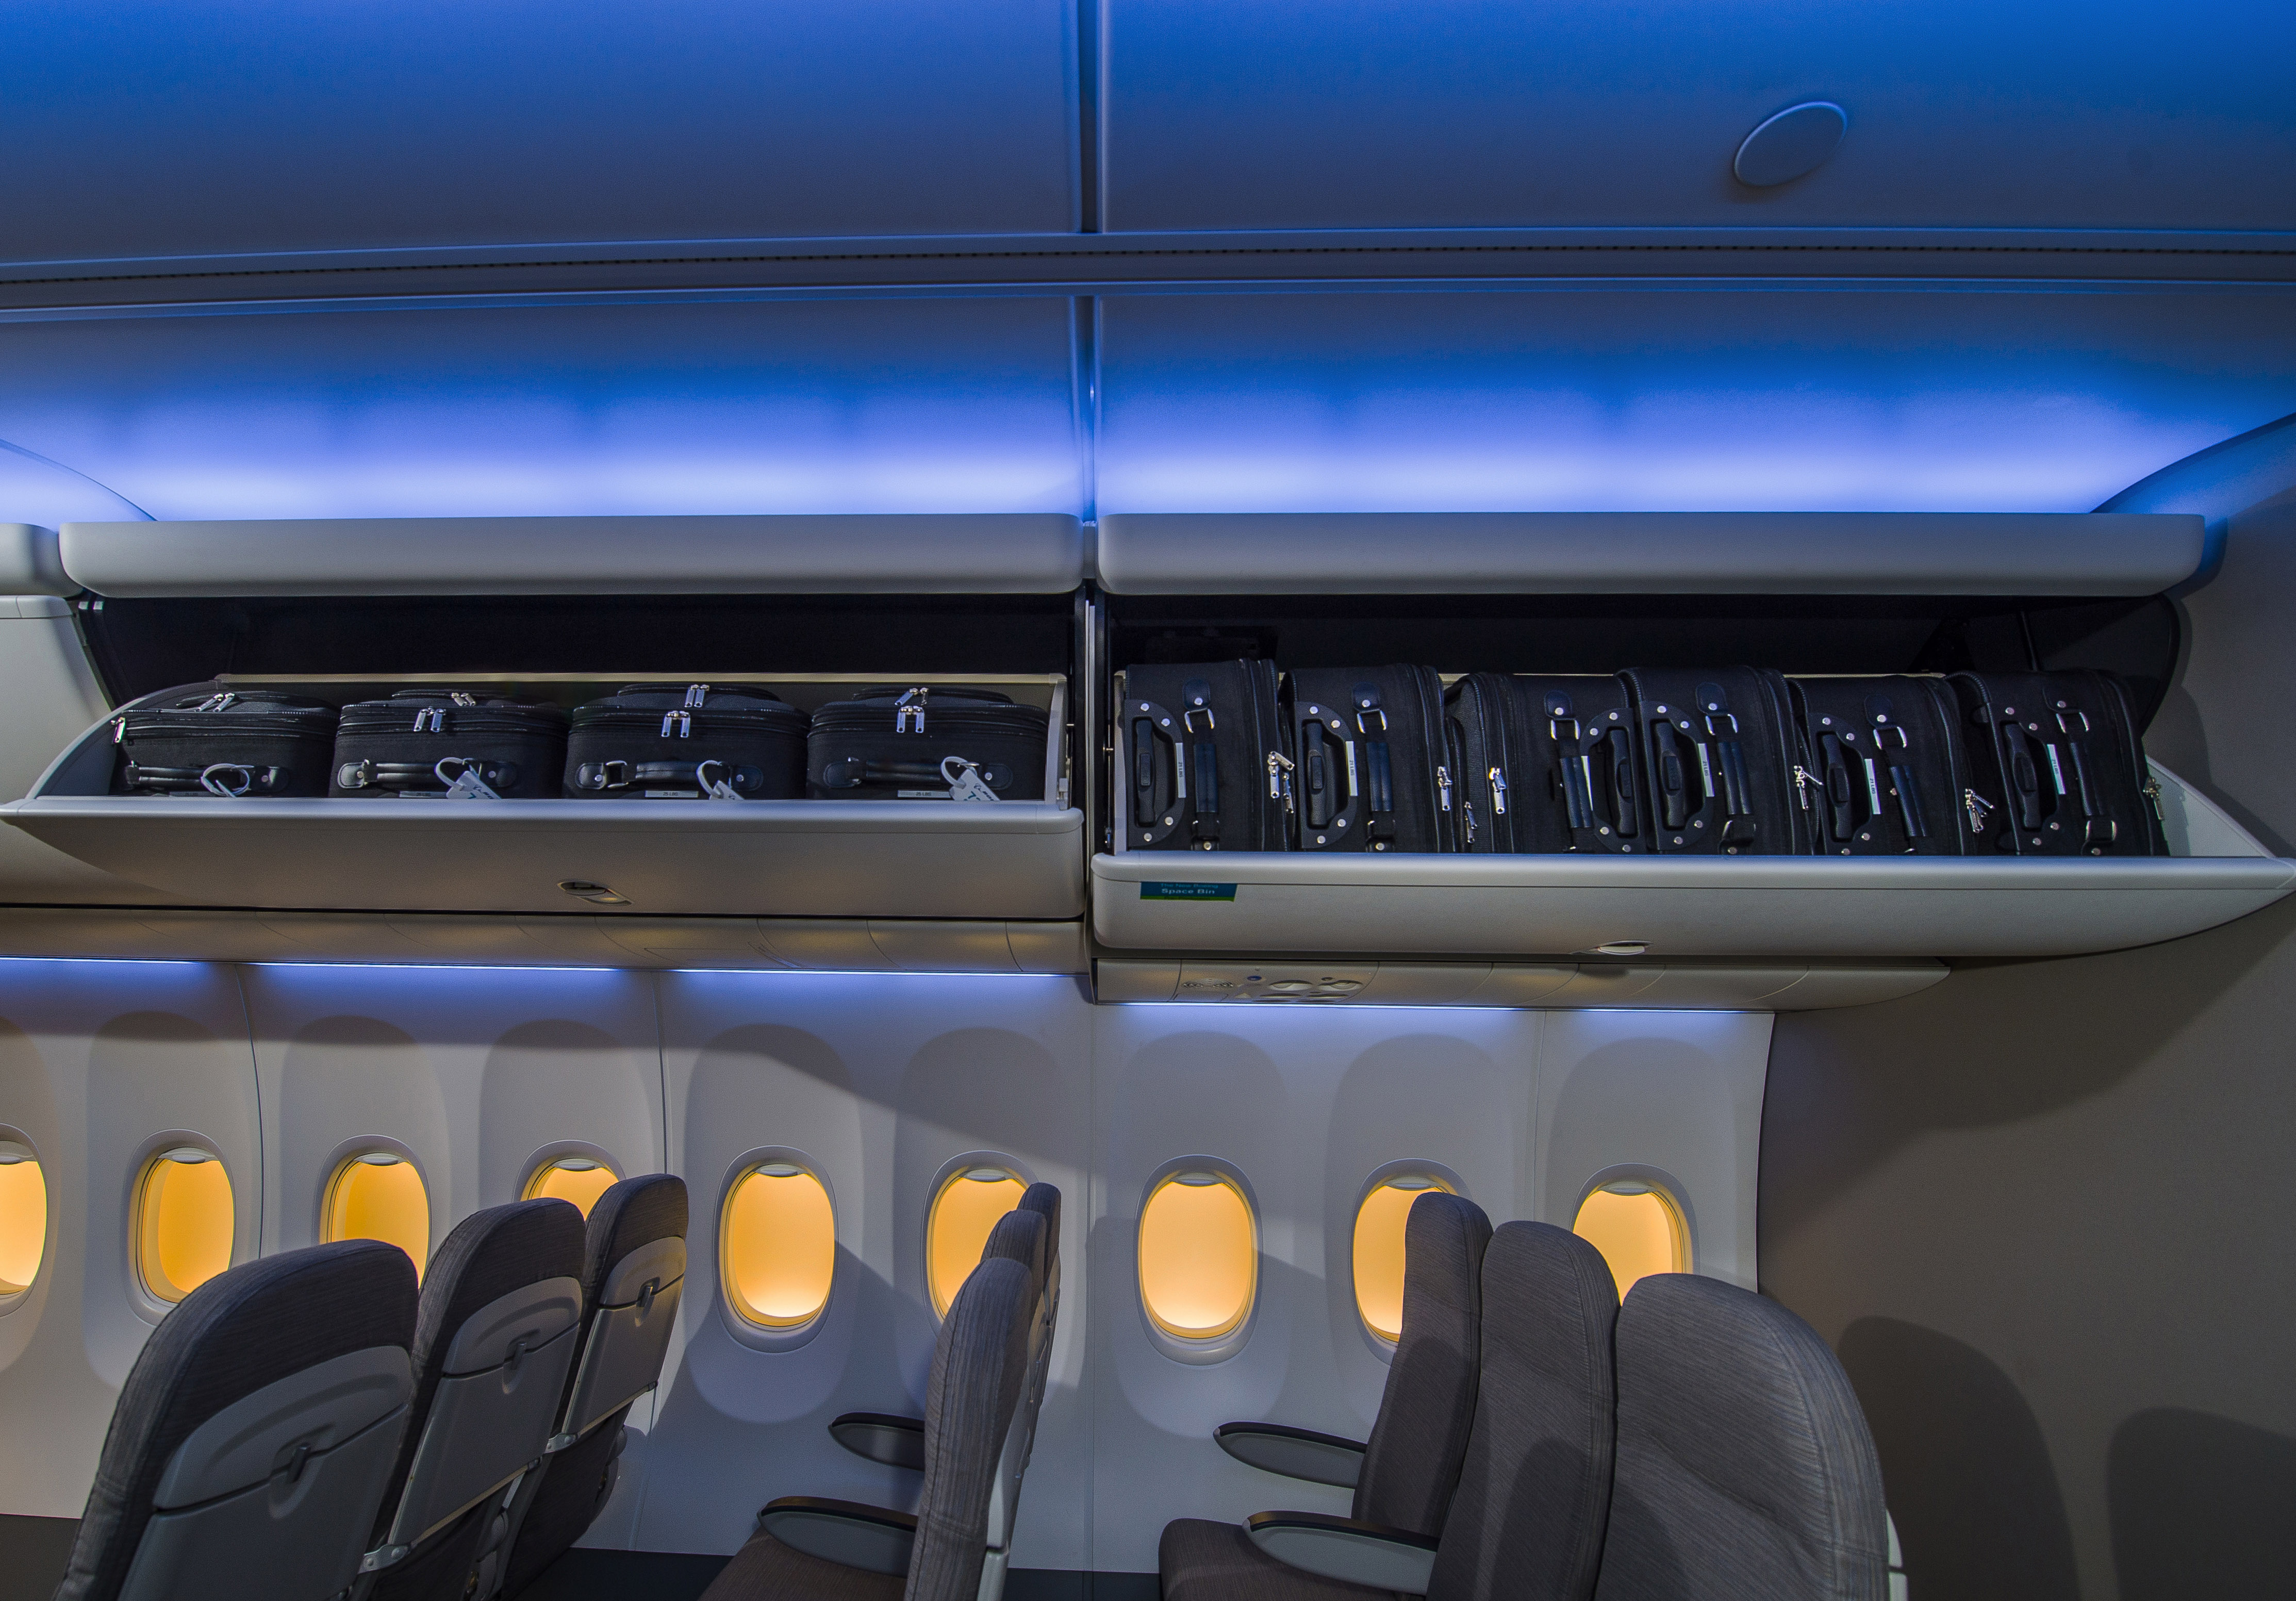 Space Bins in the 737 Configuration Studio - Photo: The Boeing Company